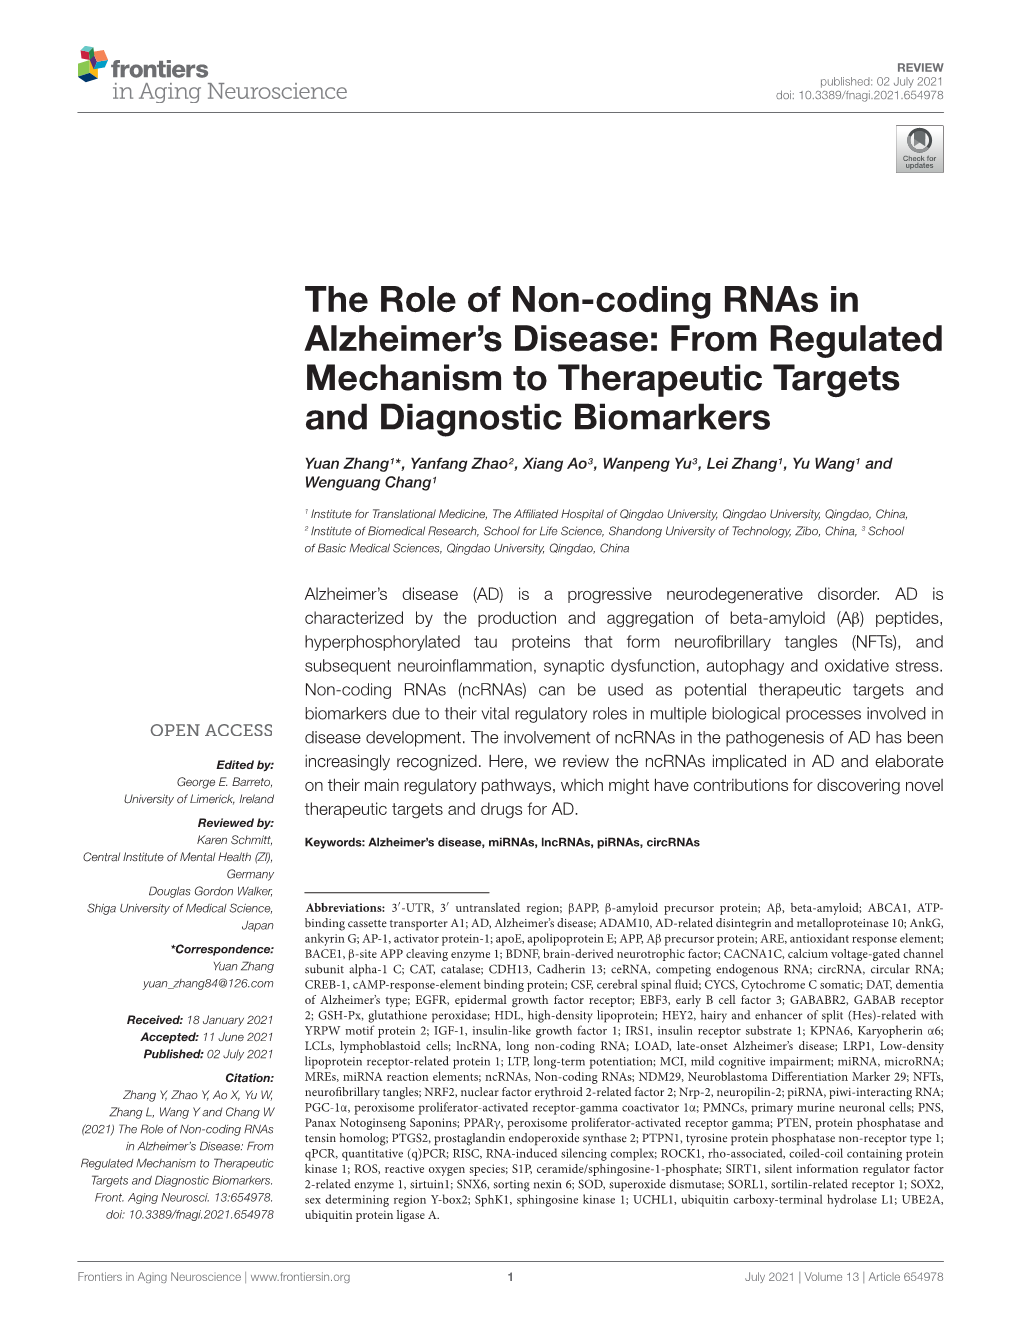 The Role of Non-Coding Rnas in Alzheimer's Disease